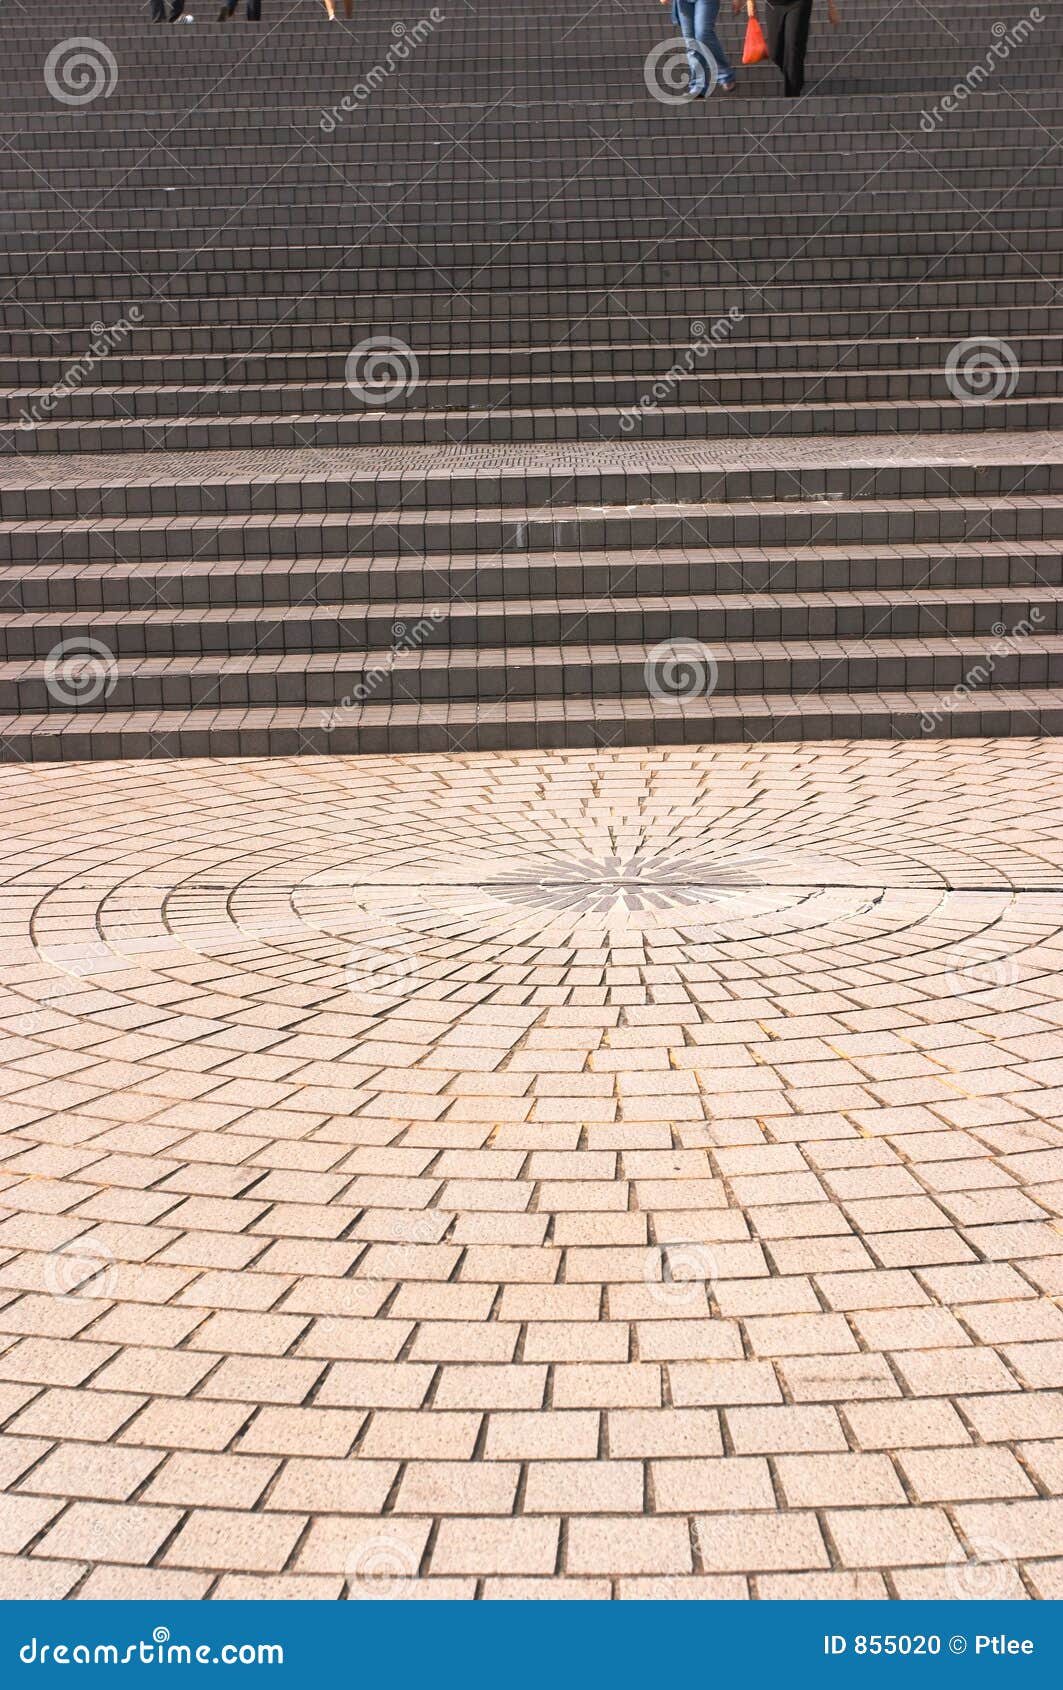 pavement leading to broad stairways